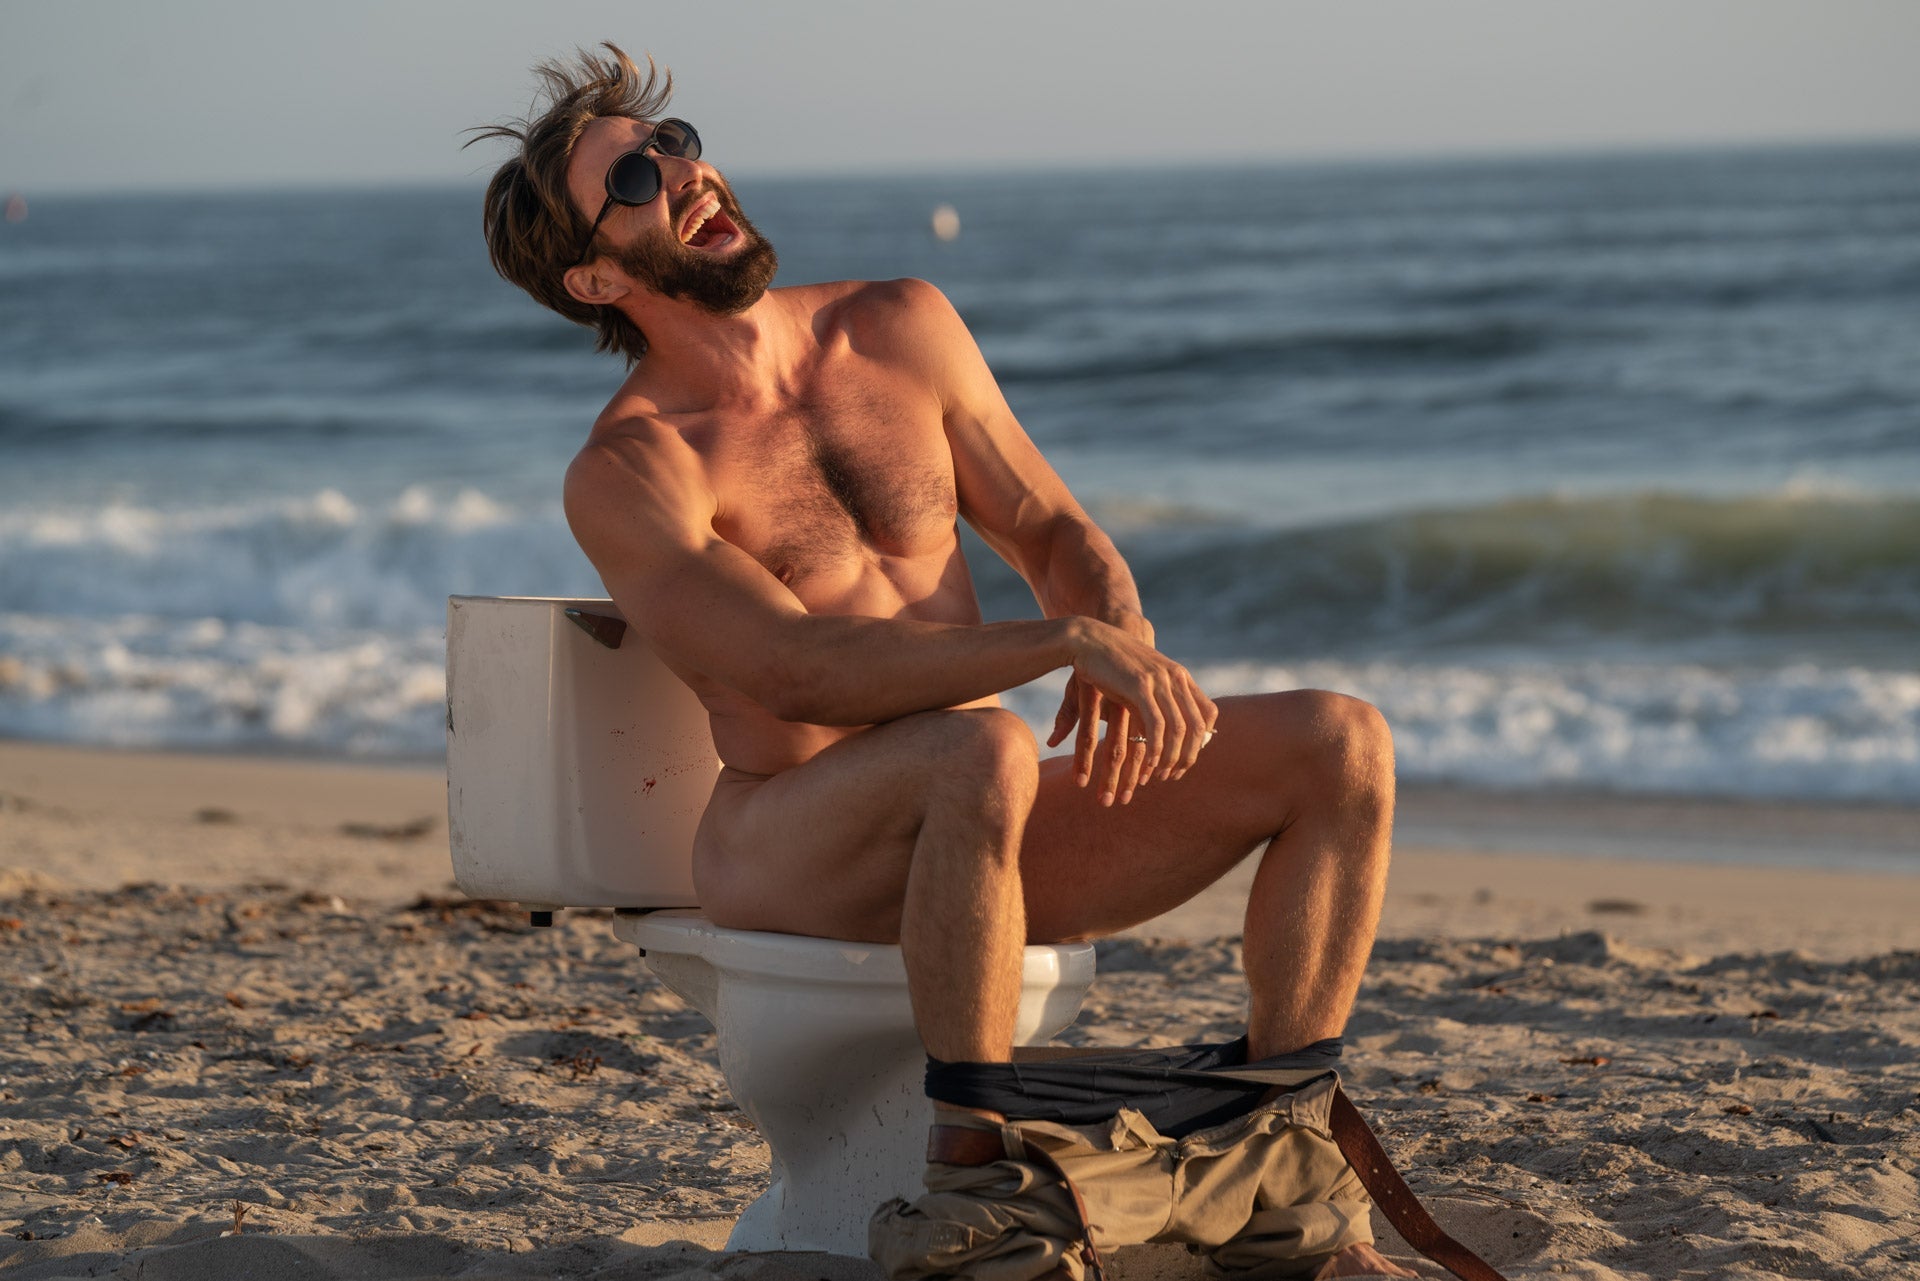 VIALE_CHARCOAL_GREY Man laughing naked on a toilet at the beach wearing Ombraz armless sunglasses with cord